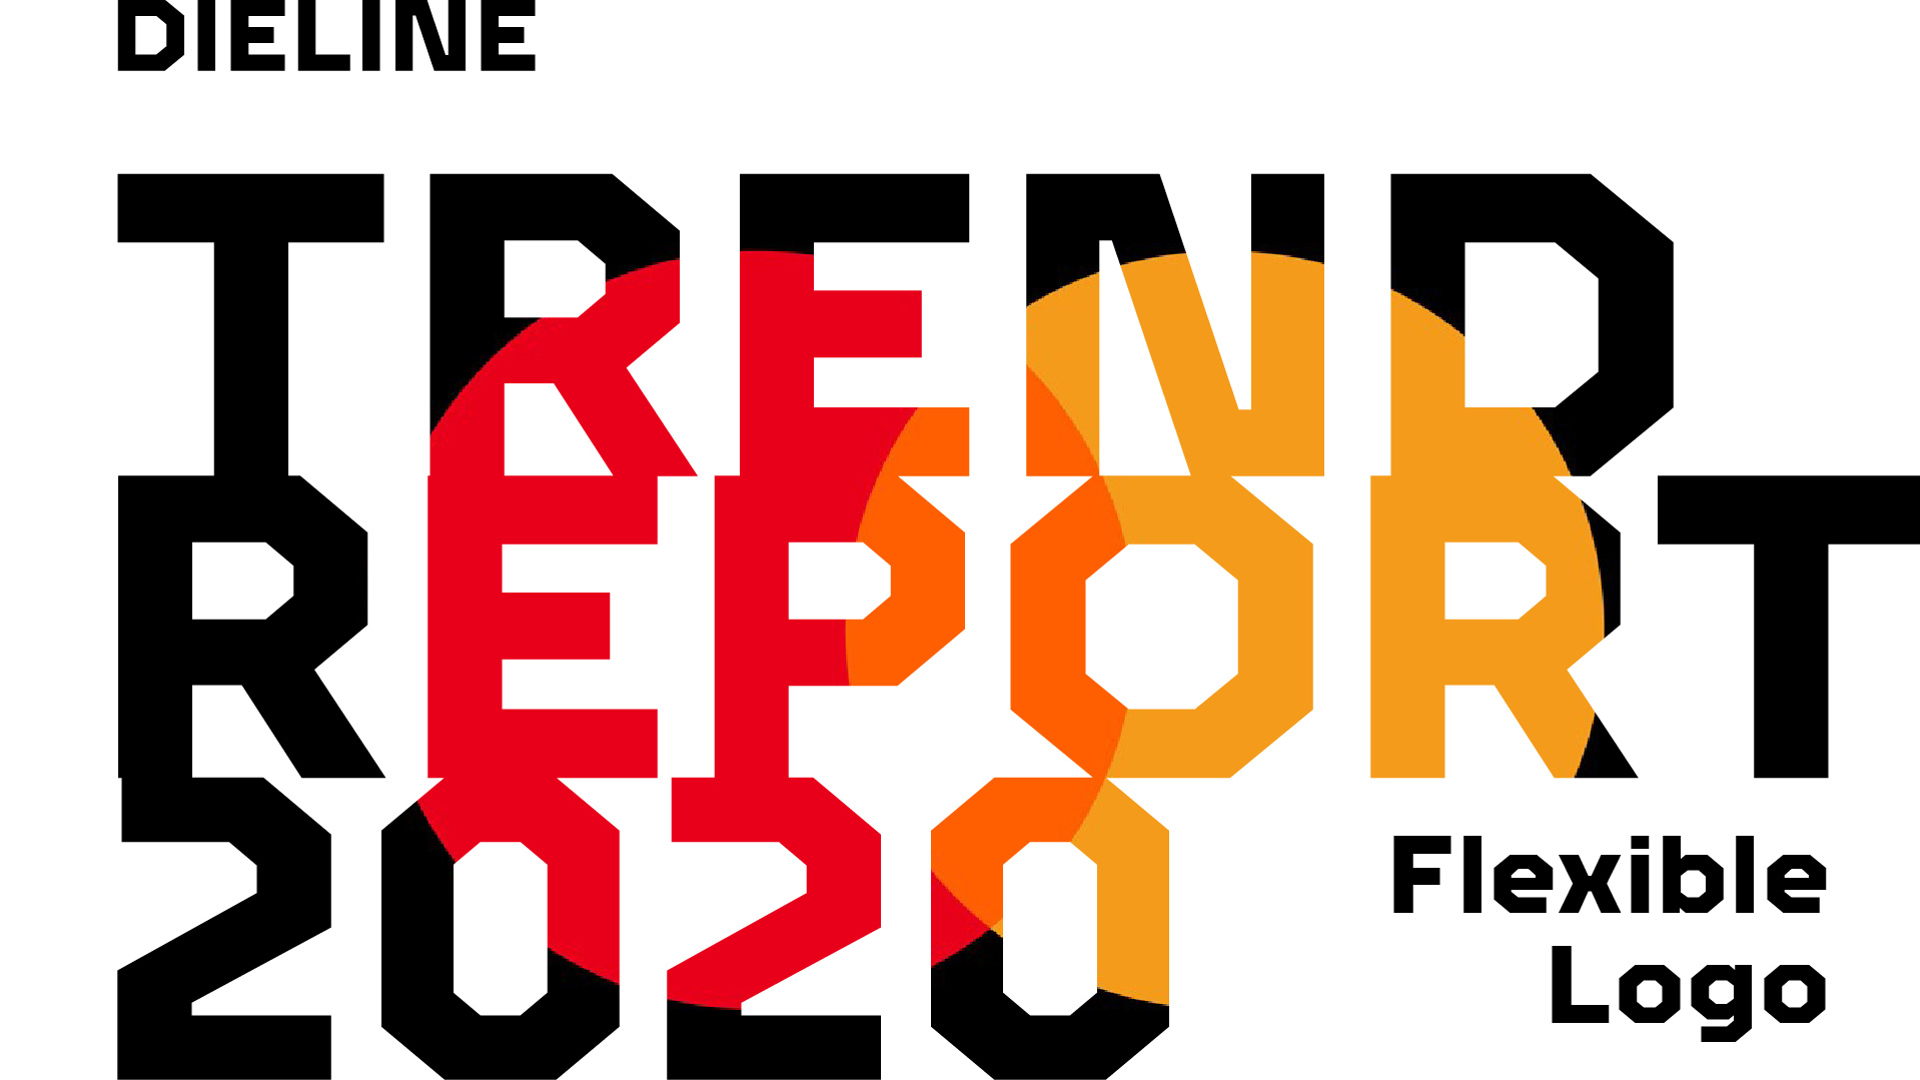 Featured image for Trend Report 2020: Flexible Logo